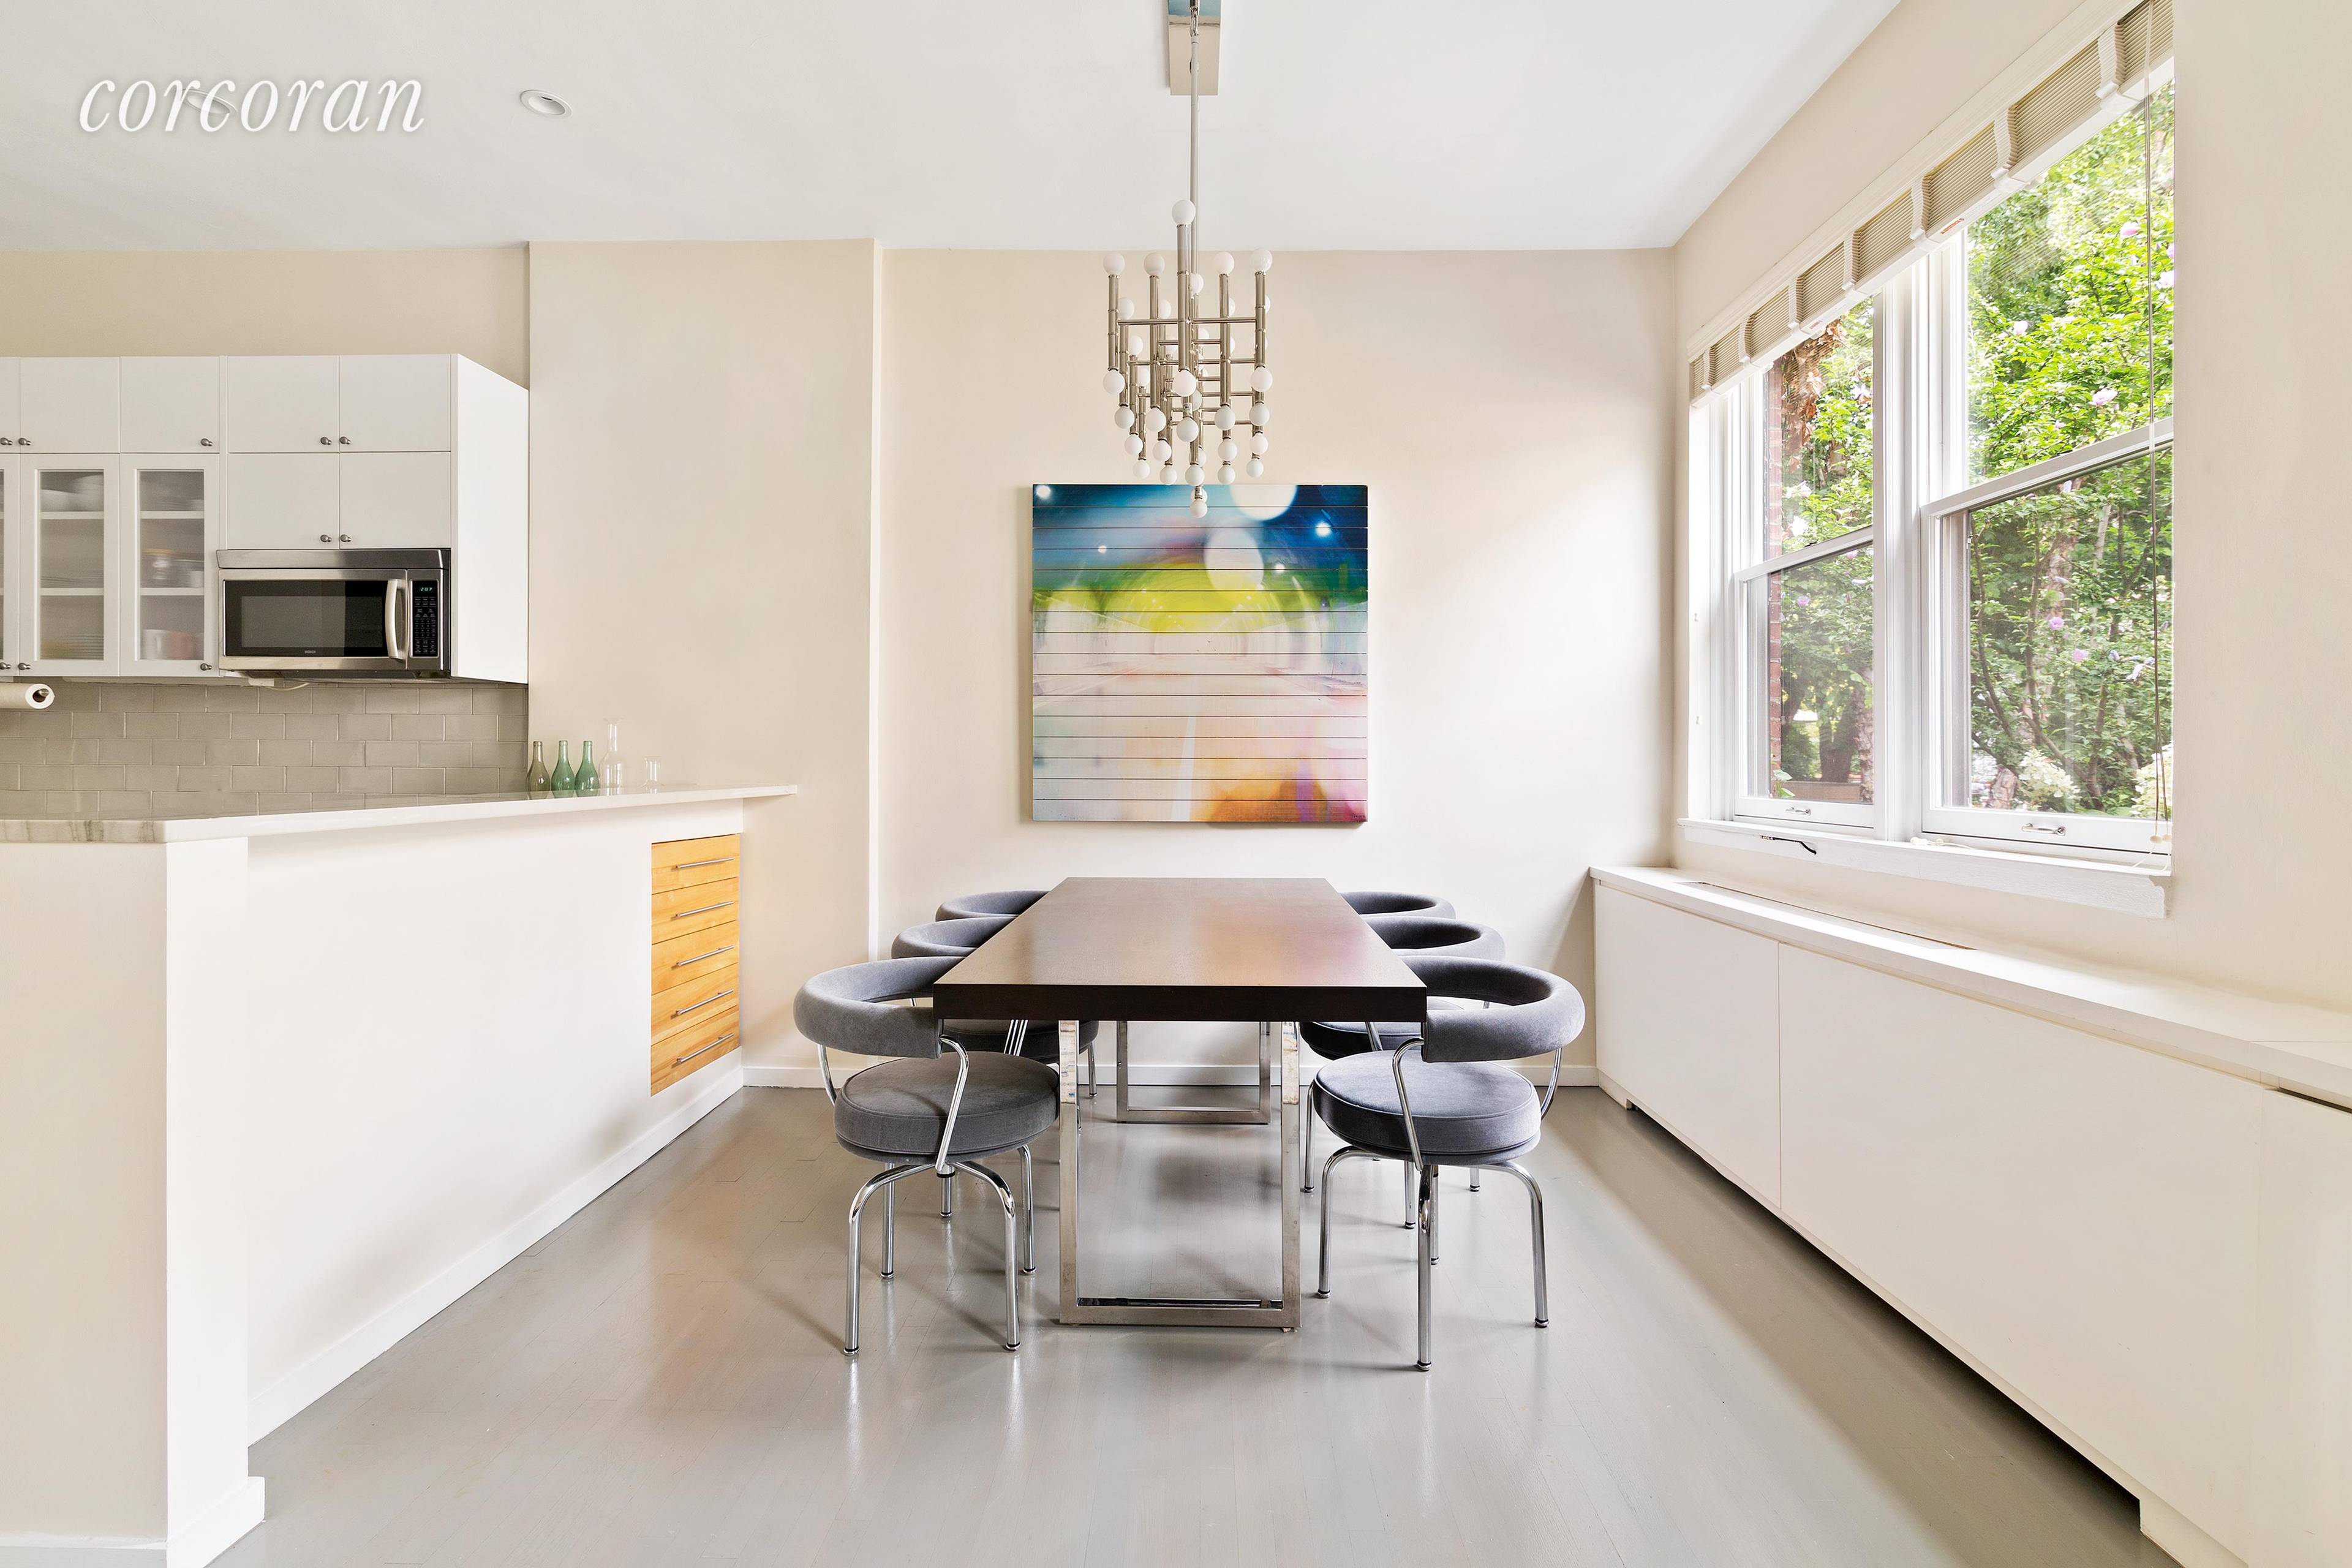 Residence 1 at 411 West 21st Street is an impeccably designed 2 bedroom, 2 bathroom home, which occupies the entire parlor floor of this 1853 brownstone.